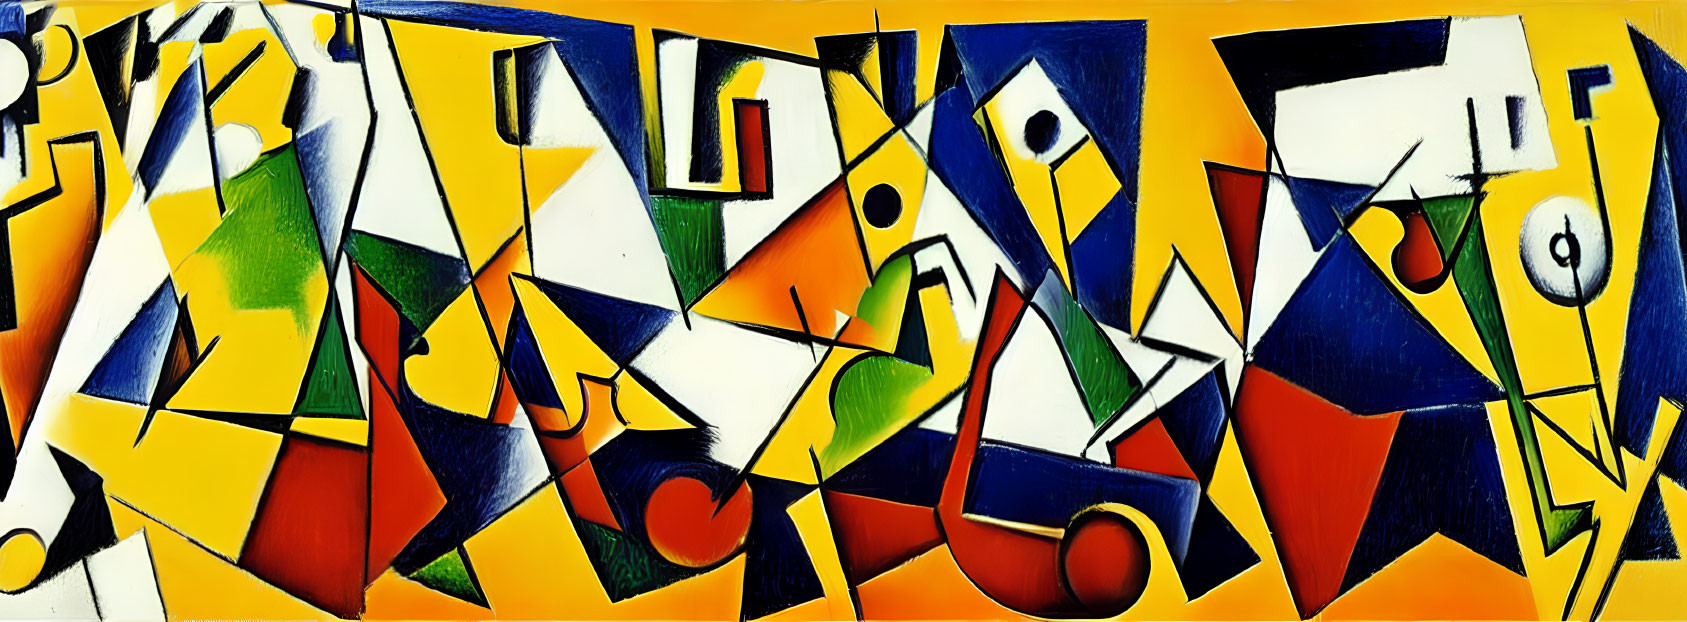 Vibrant geometric painting with yellow, blue, red, white, and black shapes